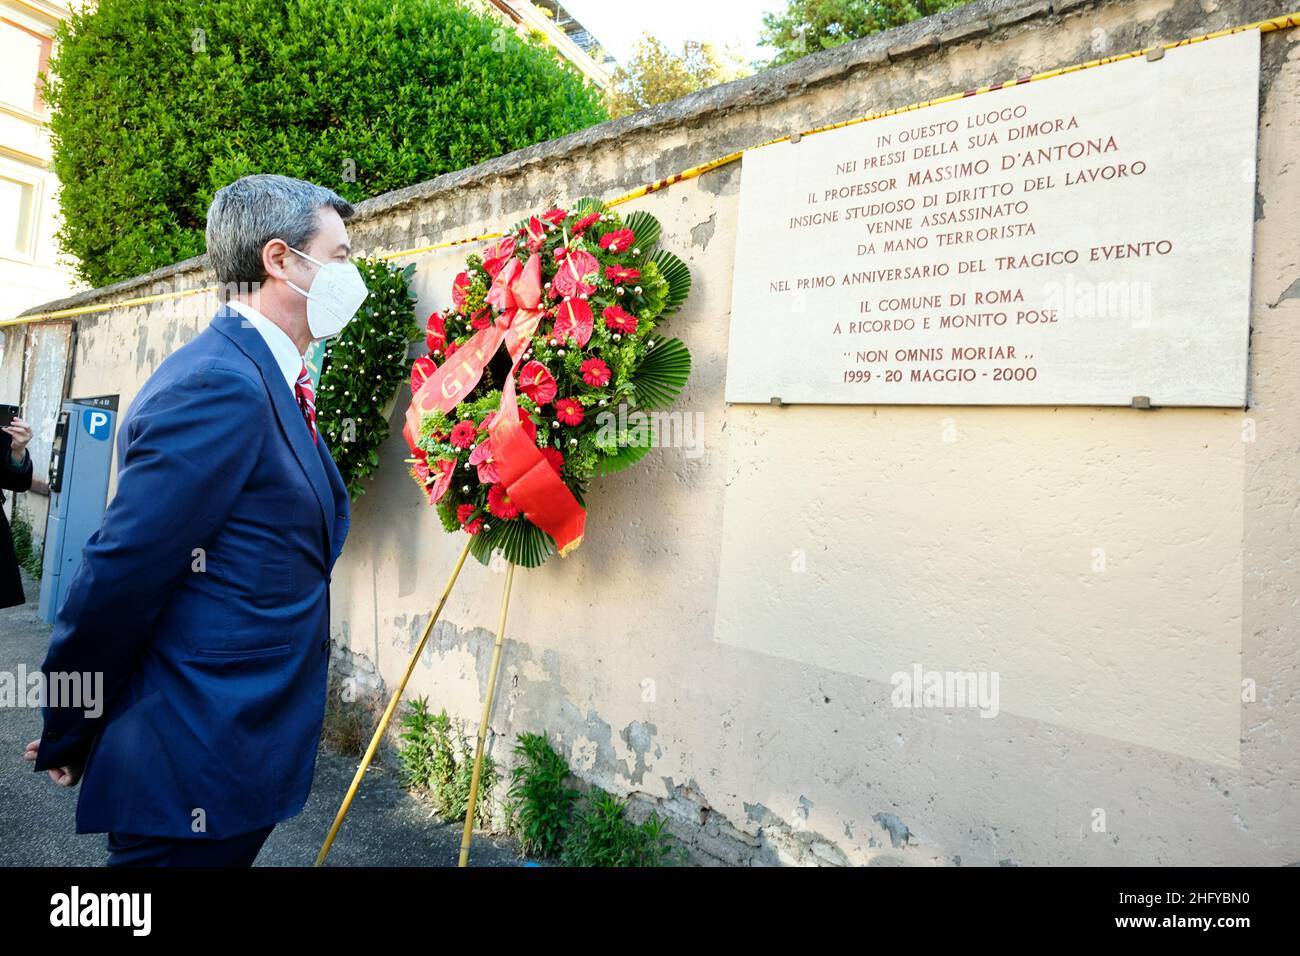 Mauro Scrobogna /LaPresse May 20, 2021 Rome, Italy News Terrorism - anniversary of the murder of D’Antona In the photo: Minister of Labor Andrea Orlando pays tribute to the plaque in memory of Massimo D’Antona killed by the Red Brigades in Via Salaria on 20 May 2000 Stock Photo